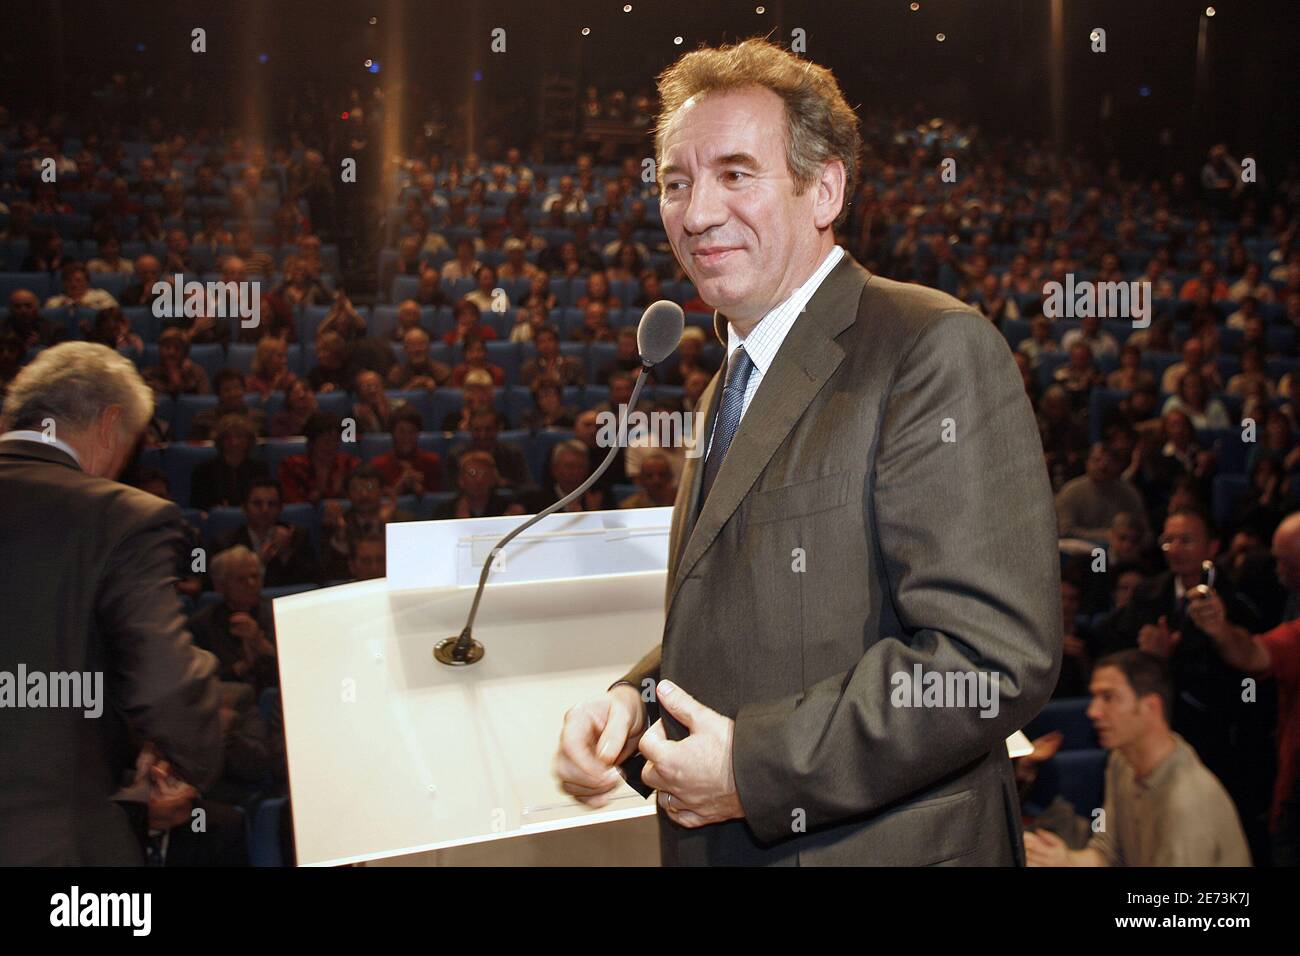 Francois Bayrou, UDF candidate for presidential elections, campaigns in Perpignan south of France on march 9, 2007. Photo by Pascal Parrot/ABACAPRESS.COM Stock Photo